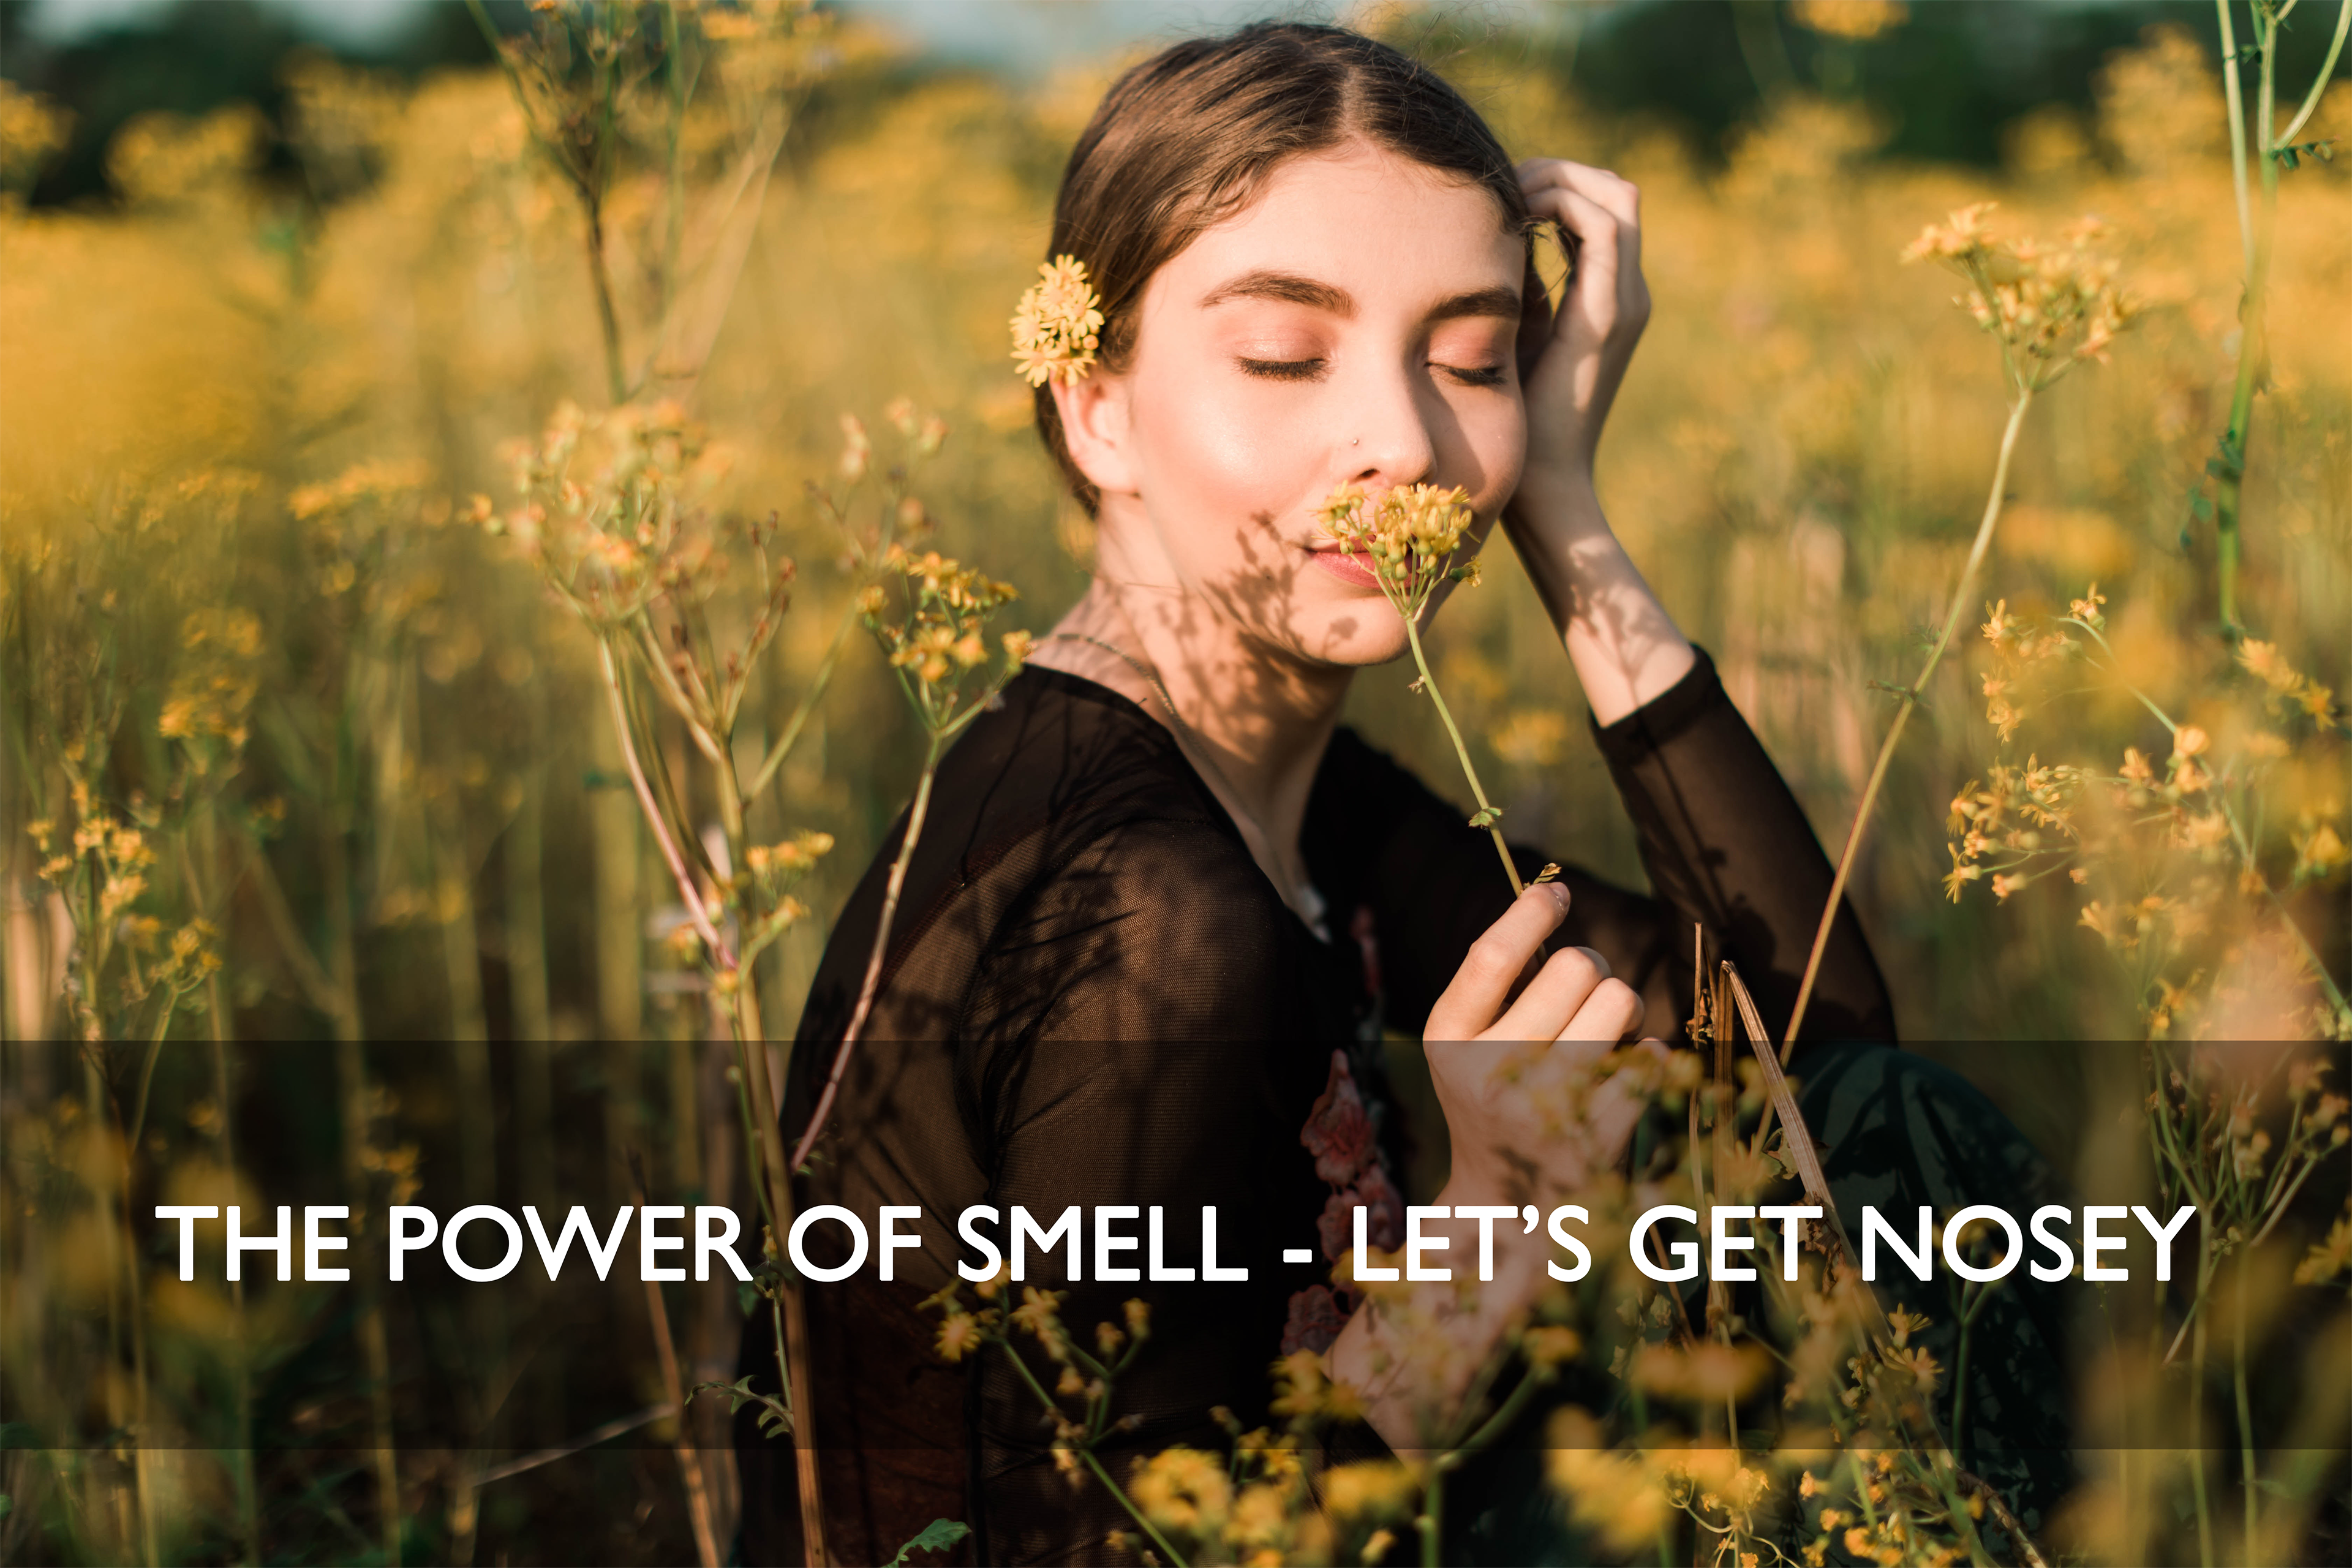 The power of smell